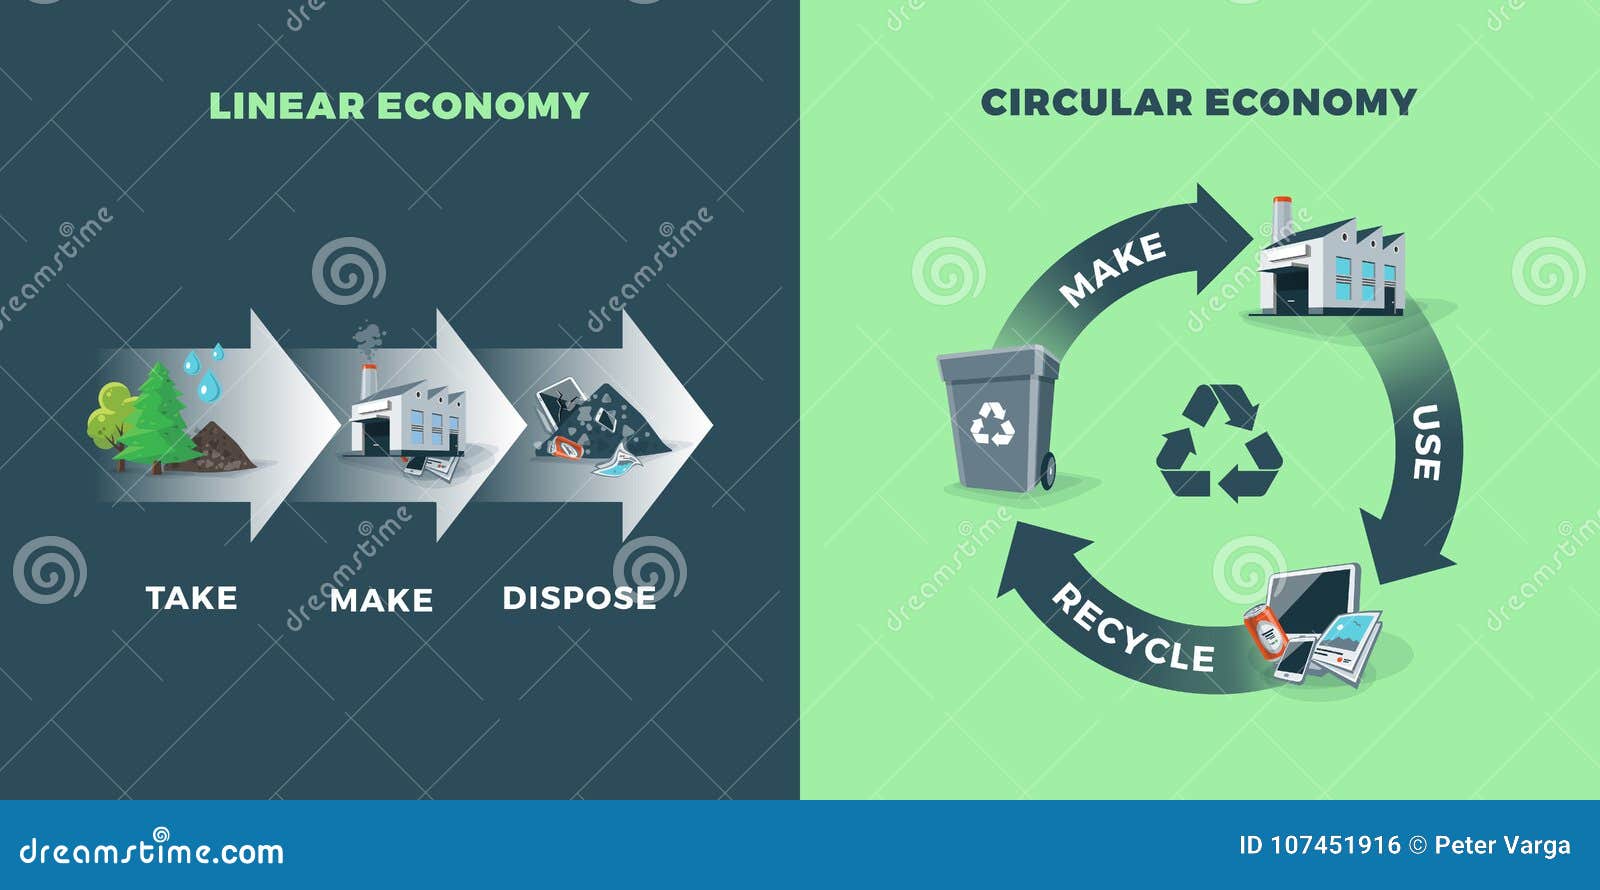 circular and linear economy compared